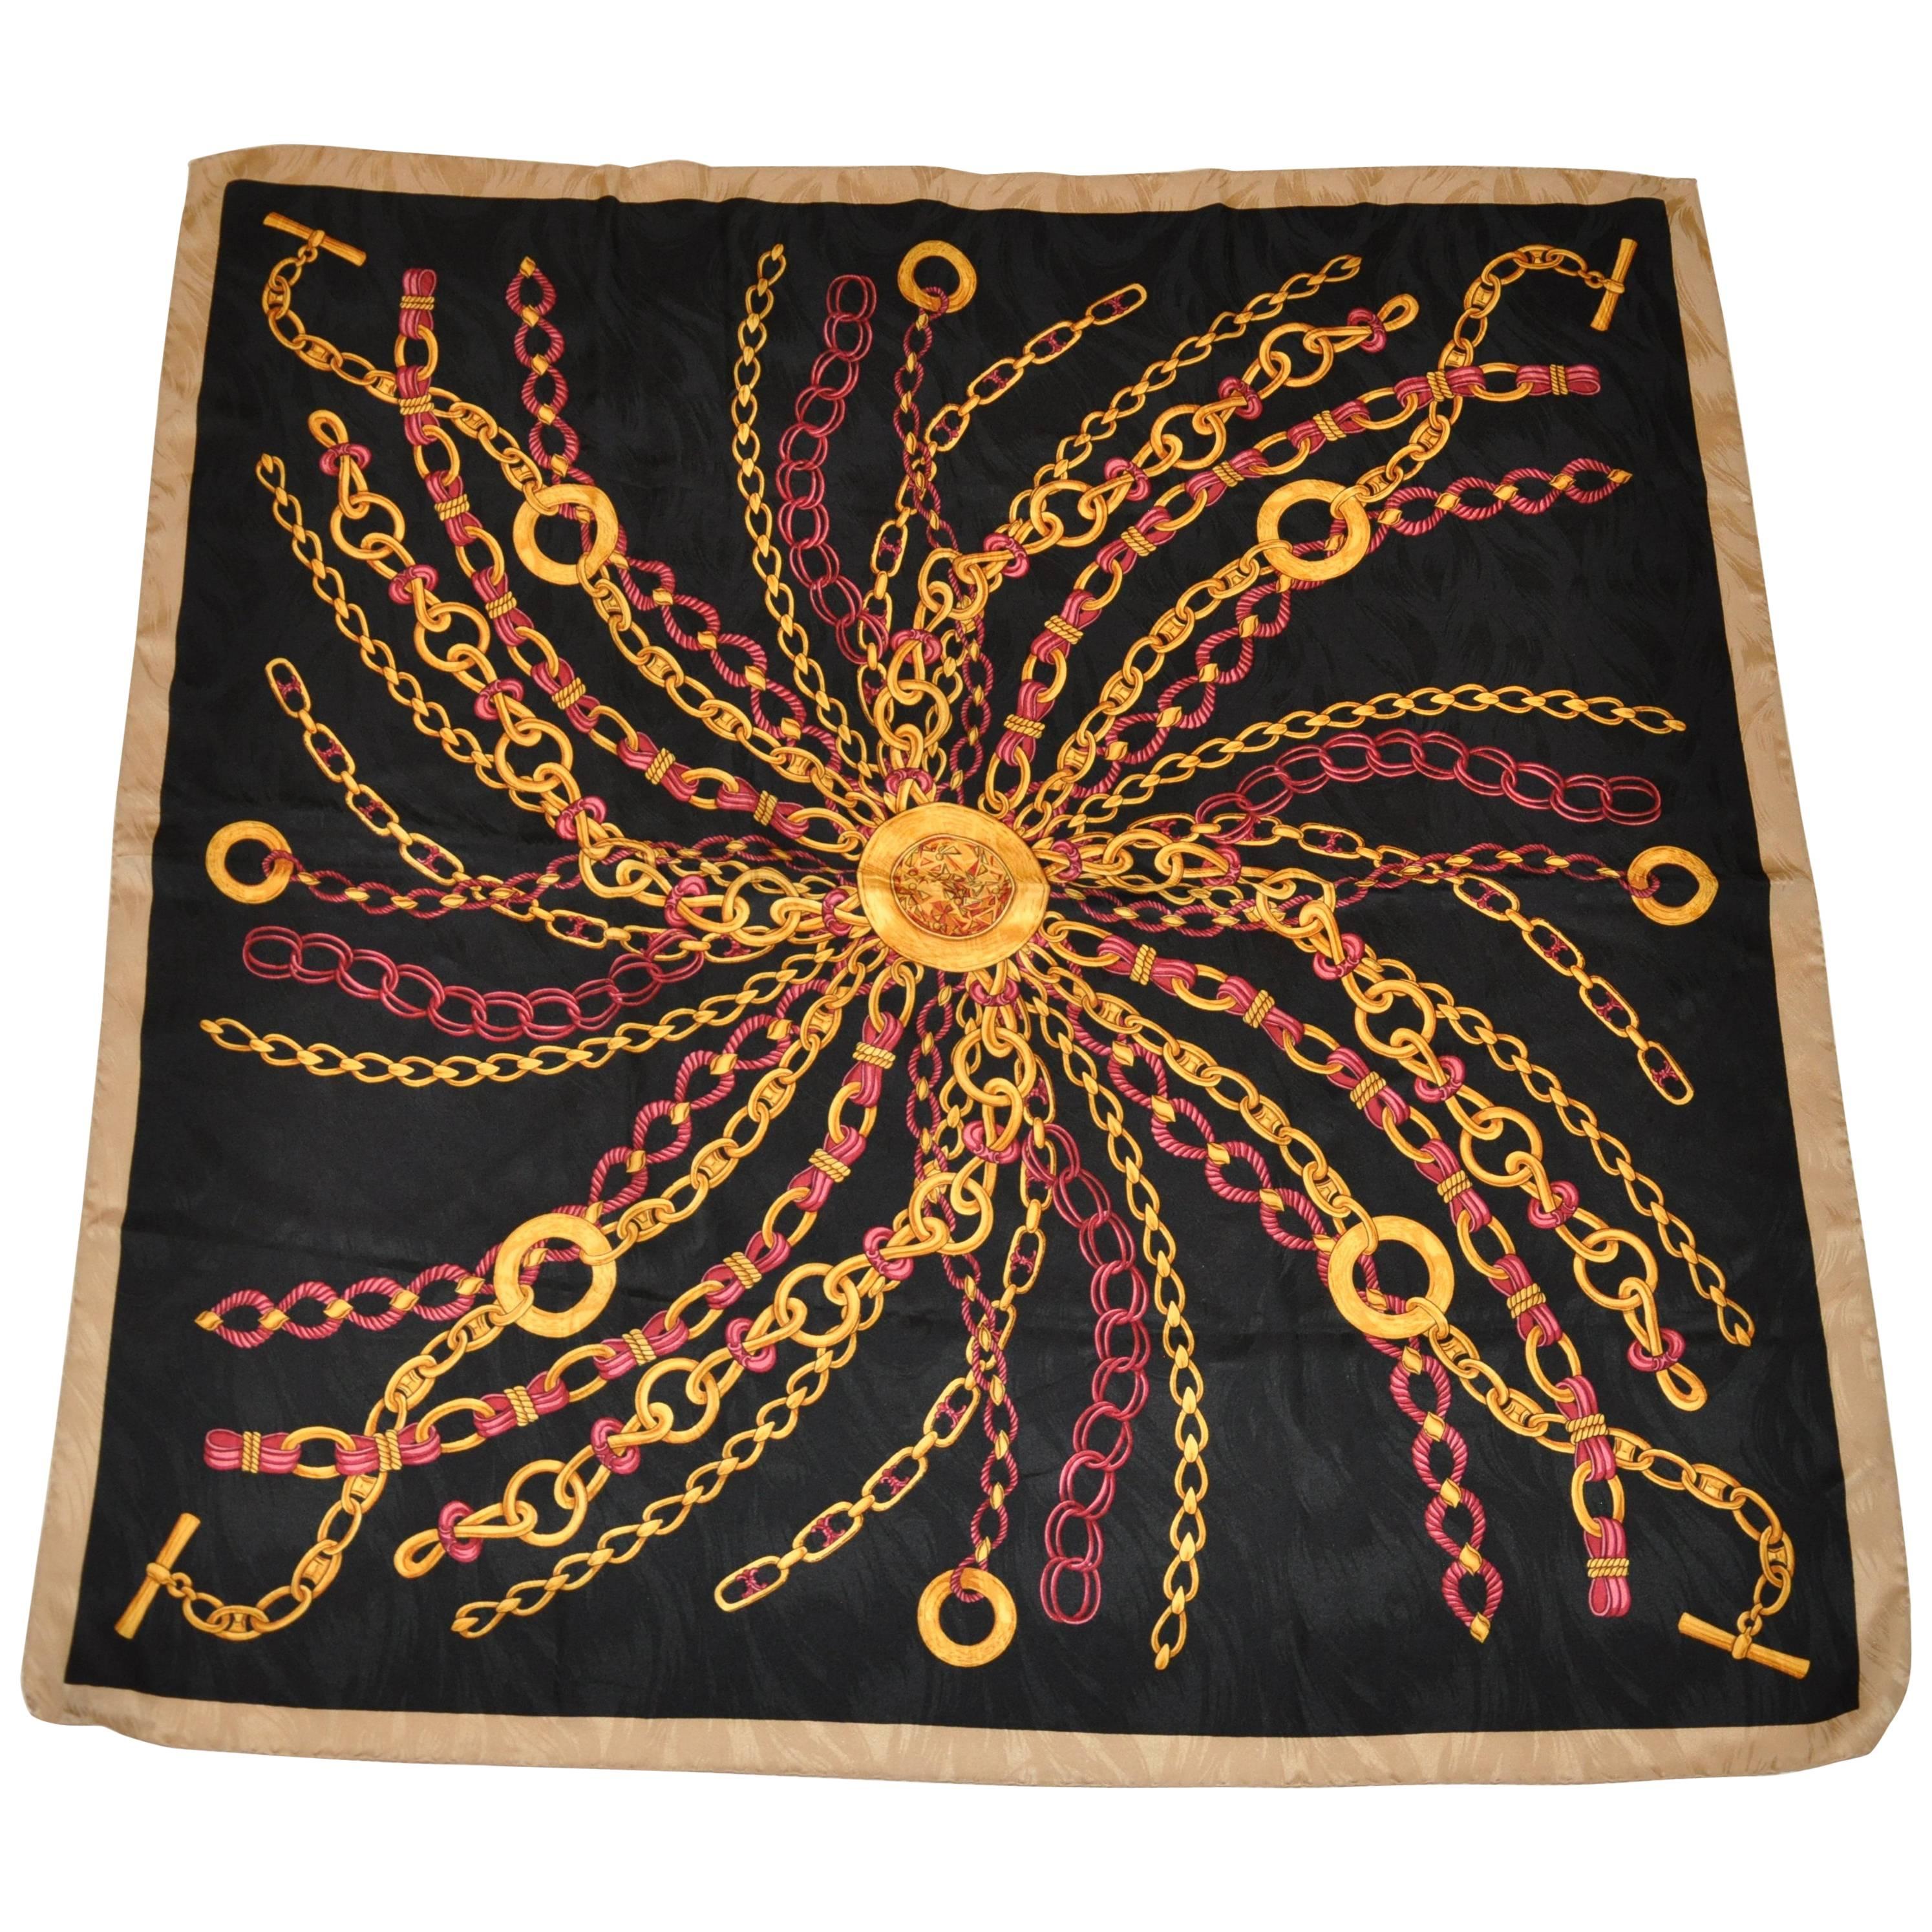 "Starburst of Golden Chains & Jewels" Silk Crepe di Chine Scarf